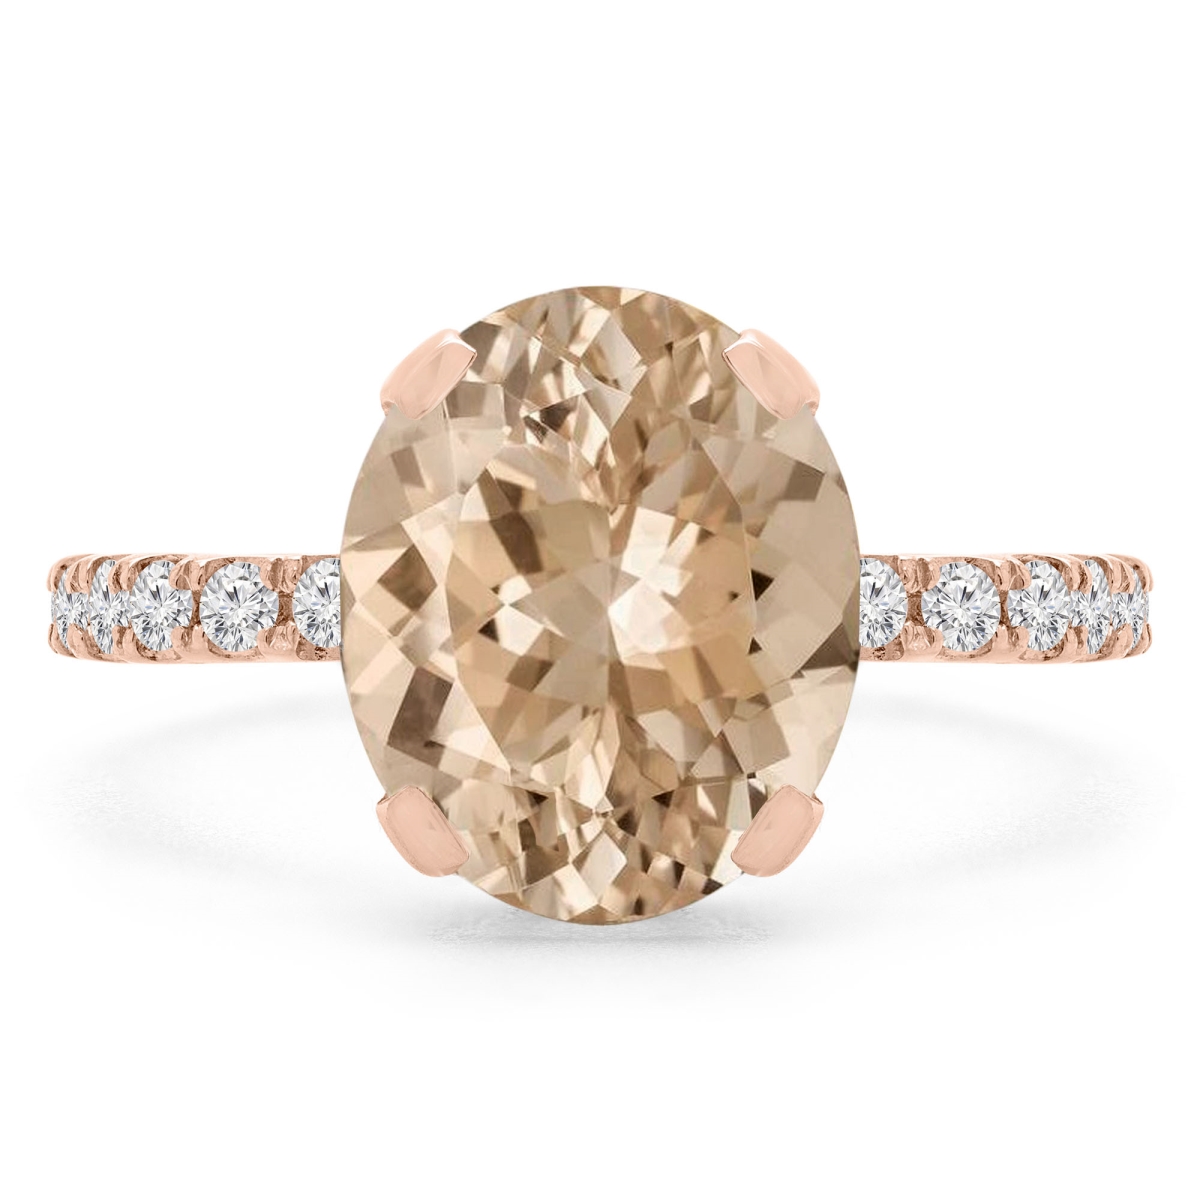 Picture of Majesty Diamonds MD190407-7.75 3.4 CTW Oval Pink Morganite Under Halo Engagement Ring in 14K Rose Gold - Size 7.75